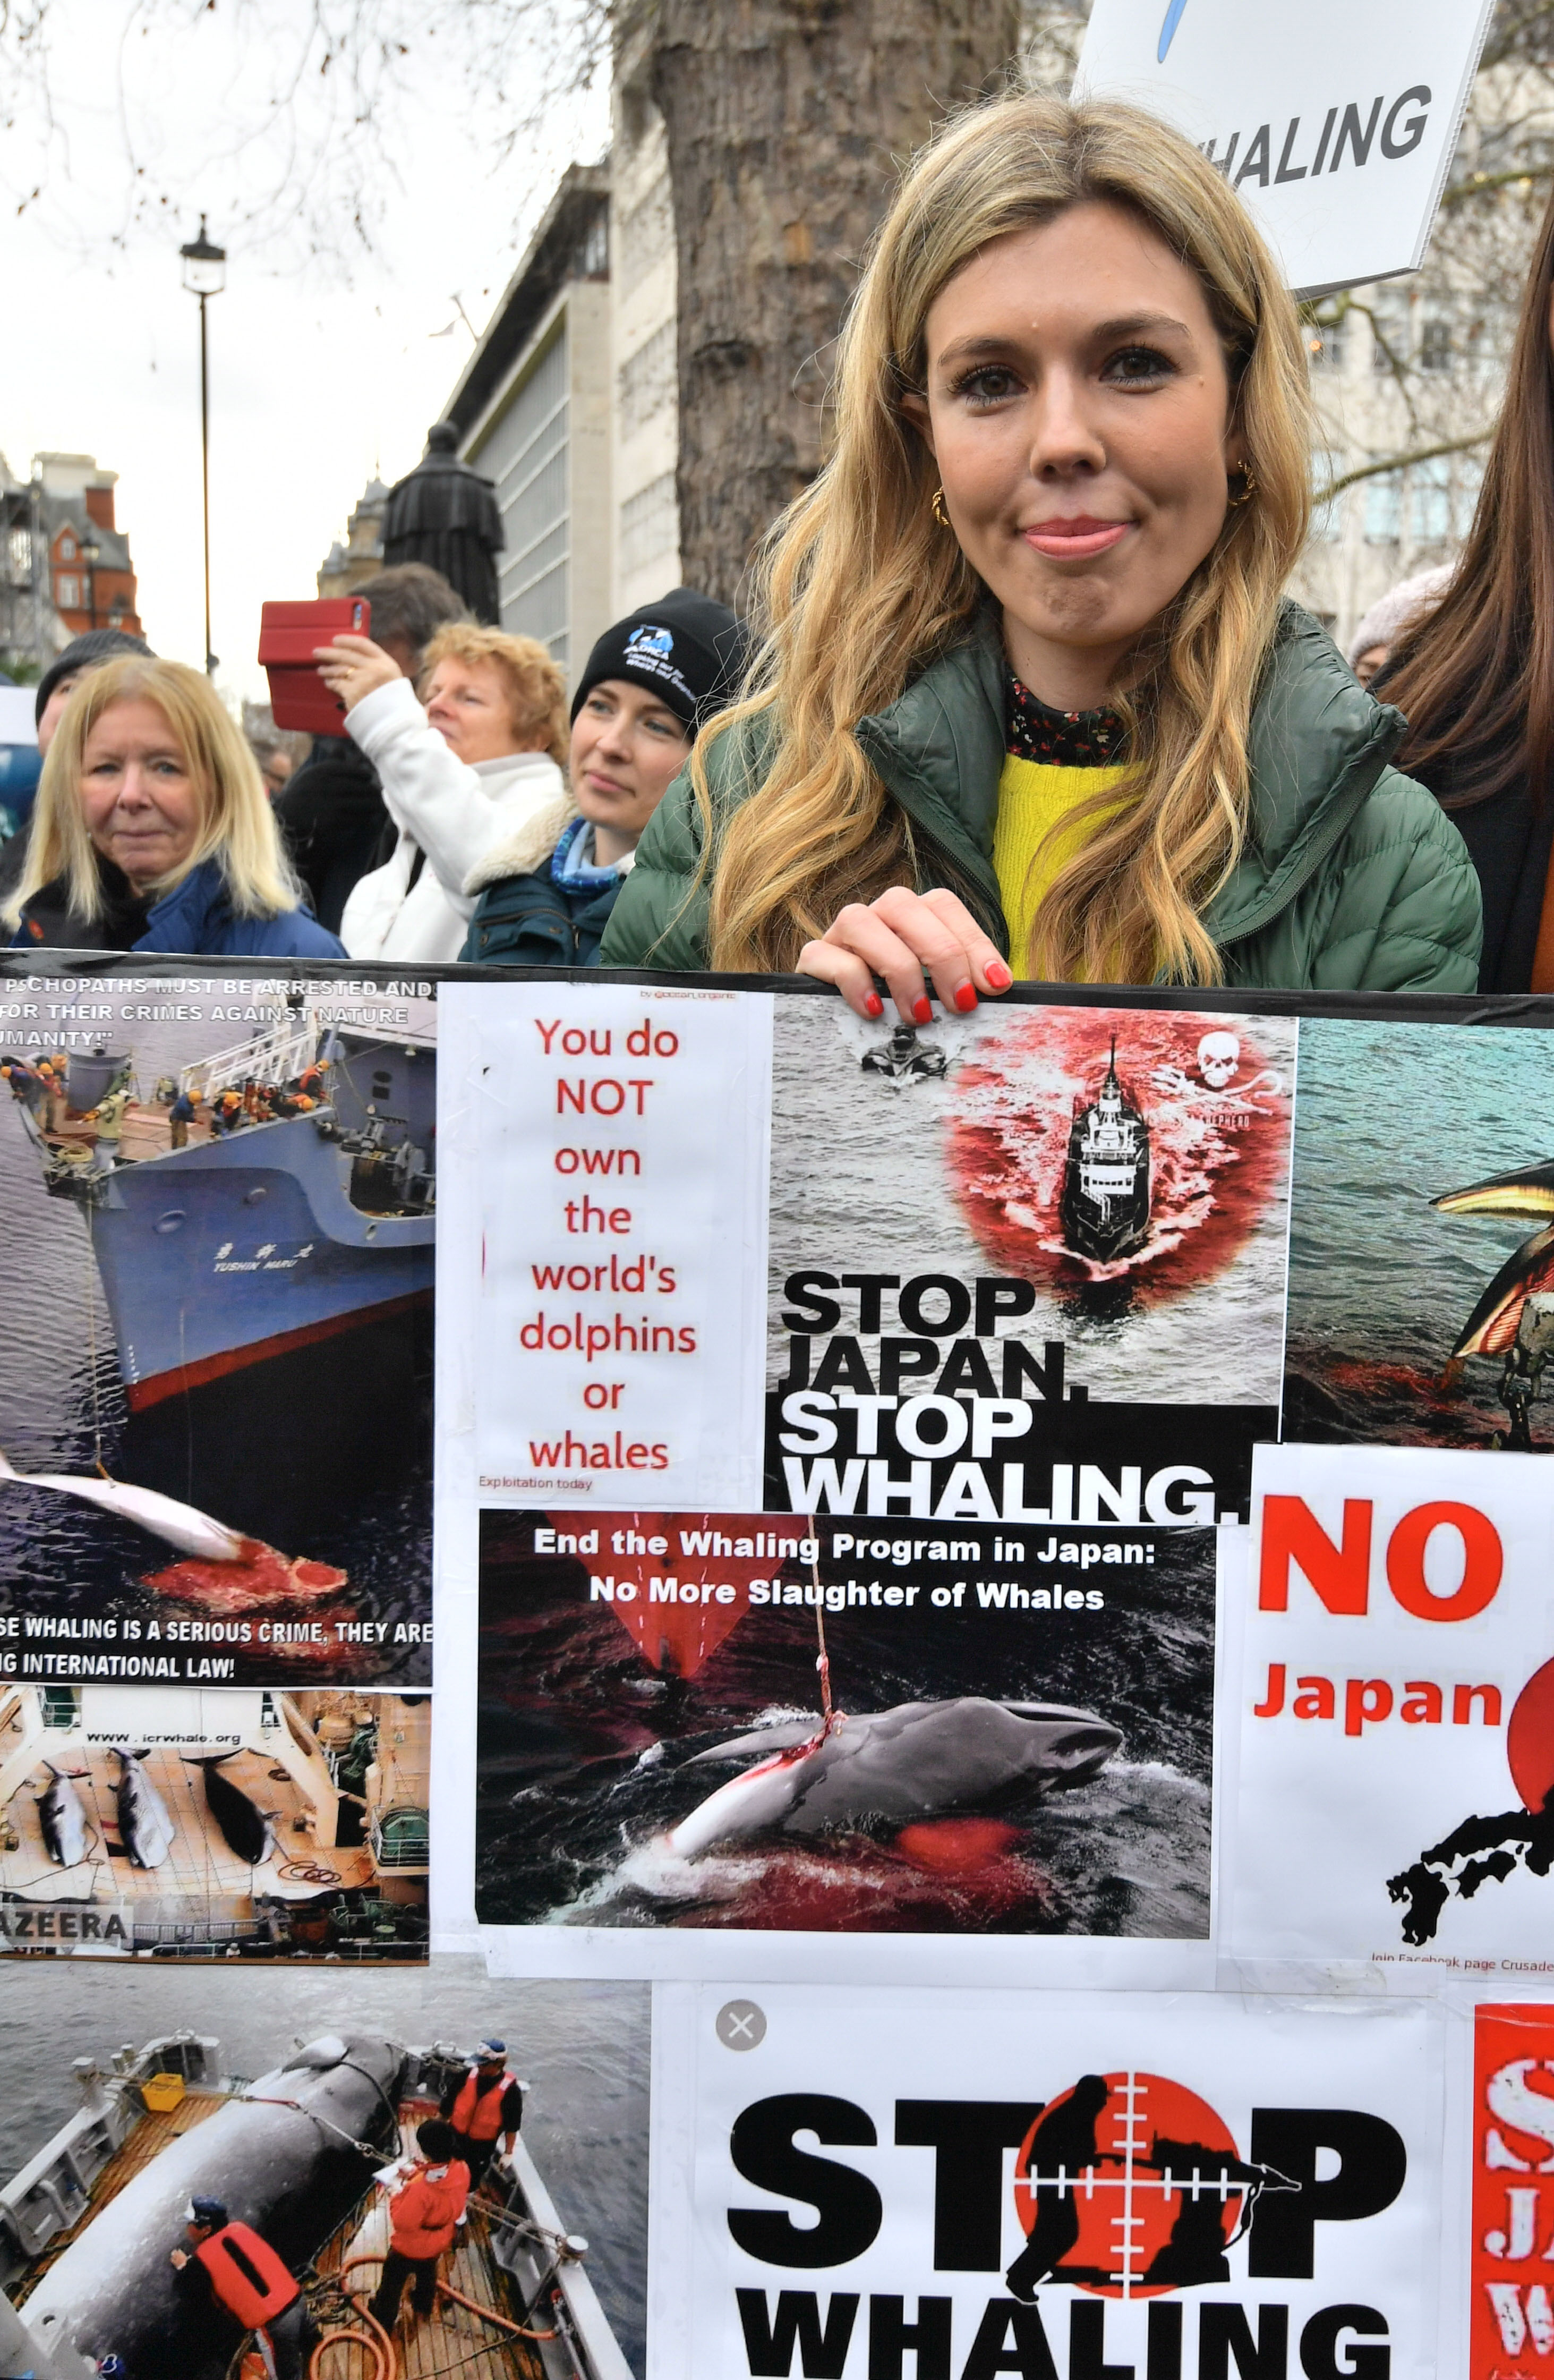 Activist Carrie Symonds takes part in an anti-whaling protest outside the Japanese Embassy in central London.